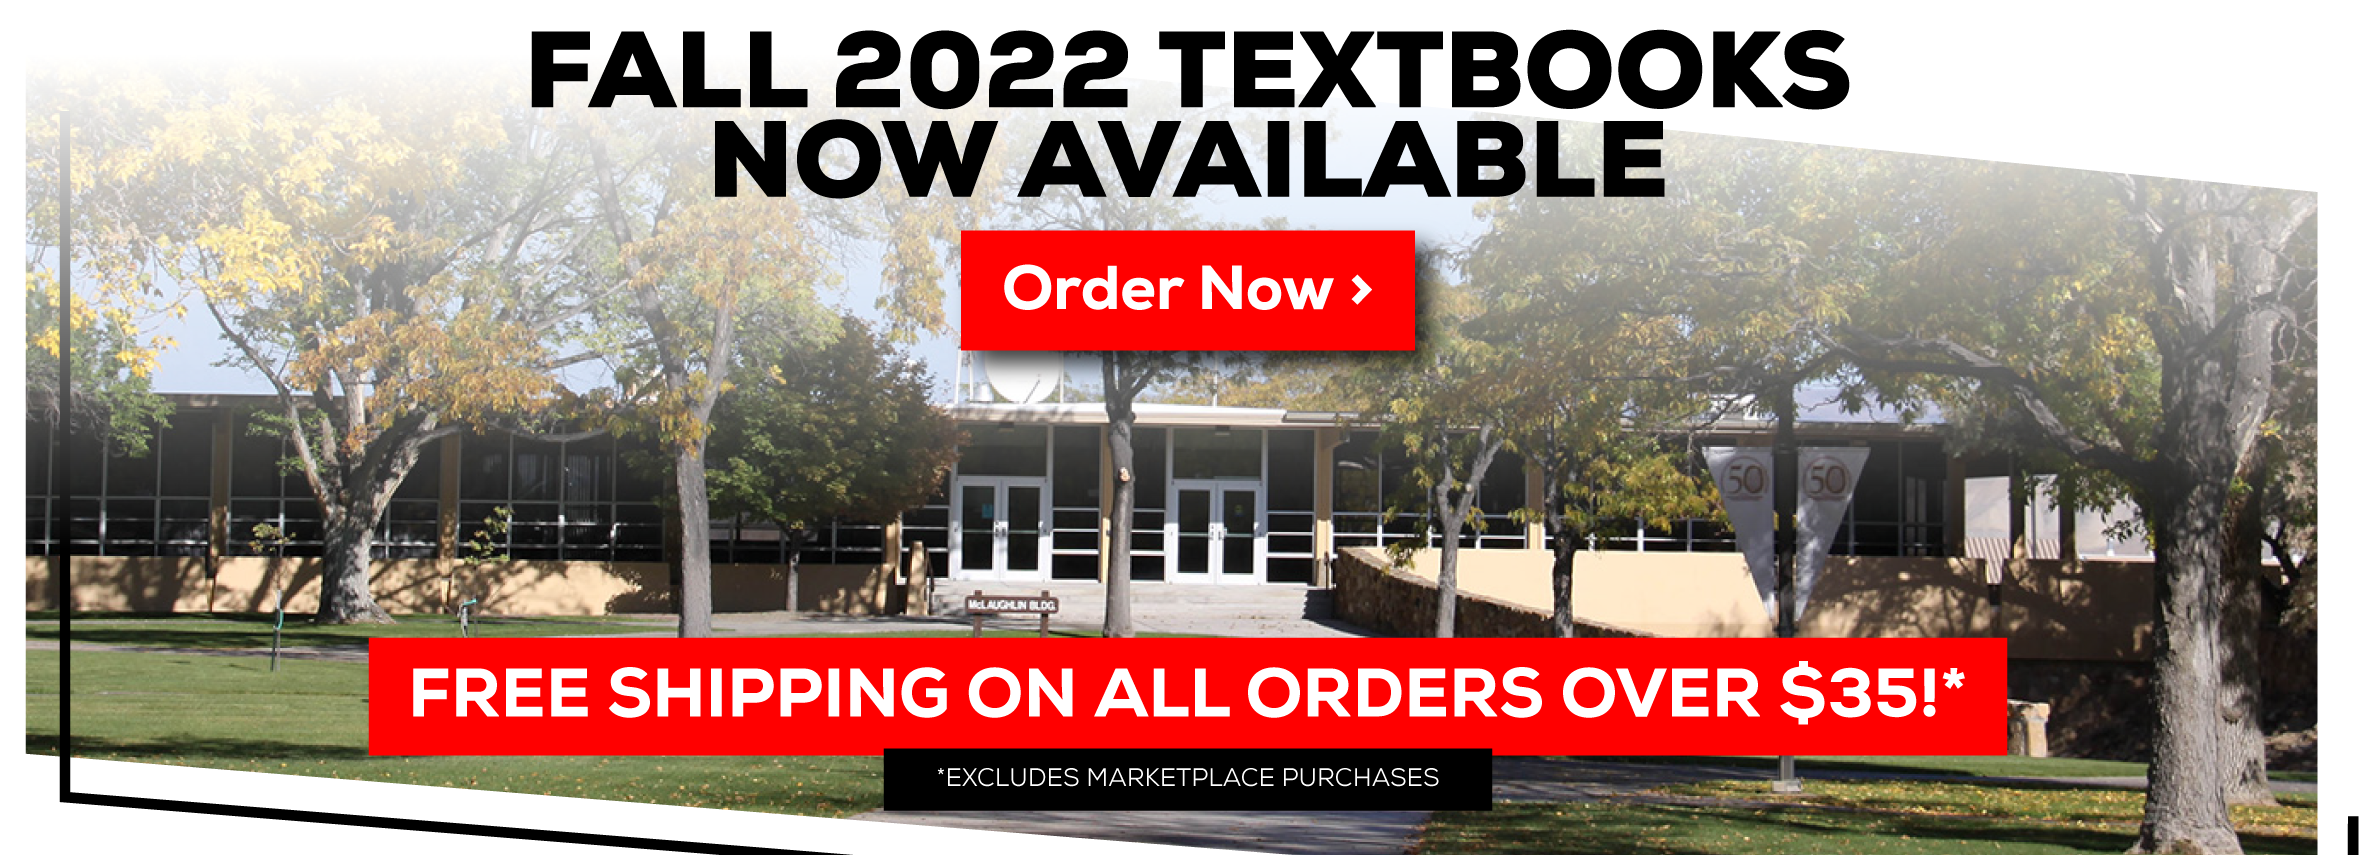 Fall 2022 Textbooks Now Available. Order Now. Free shipping on all orders over $35.* Excludes Marketplace Purchases.